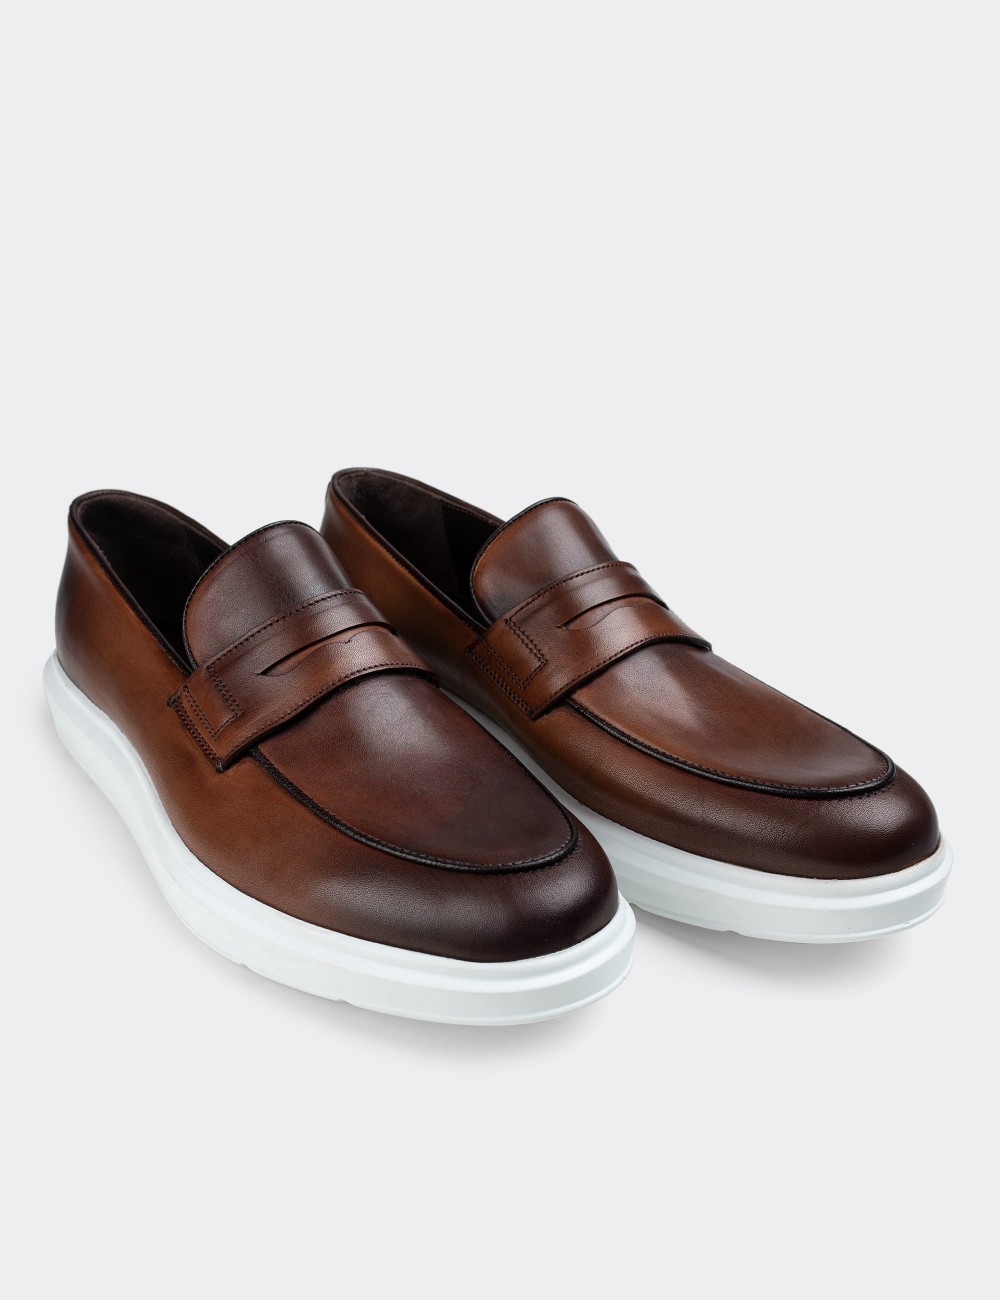 Tan  Leather Loafers - 01839MTBAP01